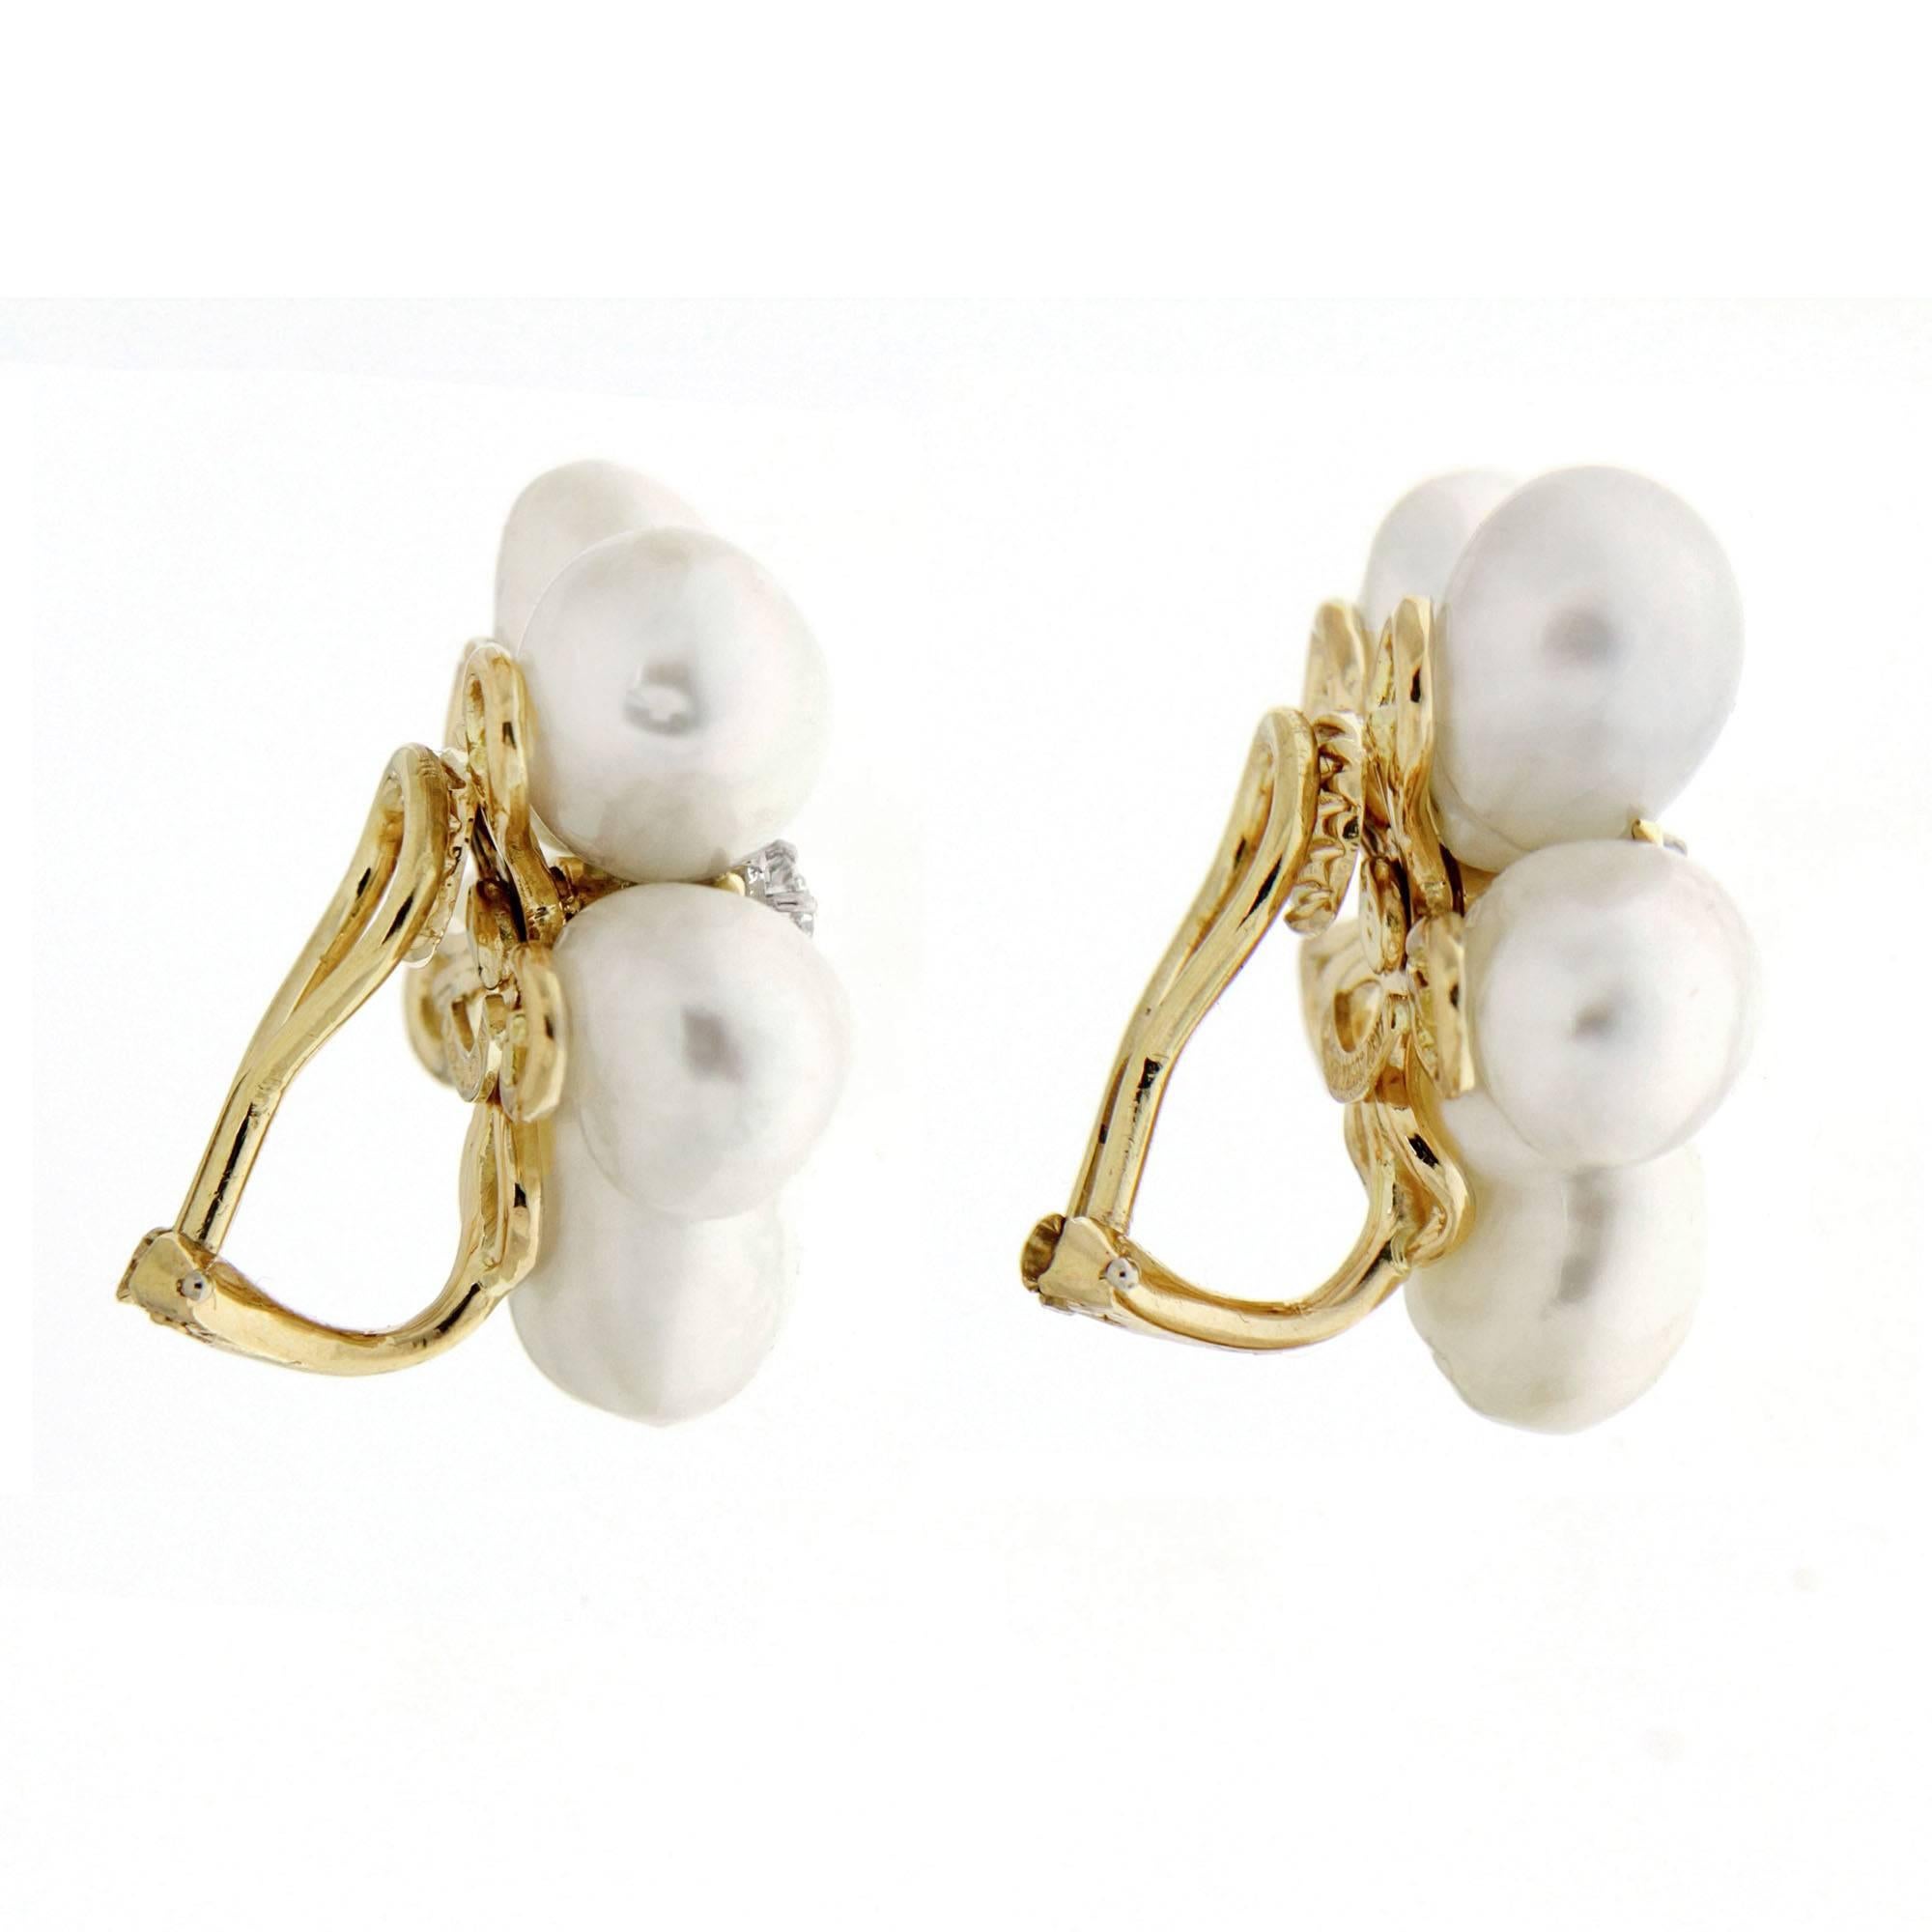 Pearls become these earrings’ petals. Each earring has five oblong keshi pearls clustered together, forming a flower. Six round brilliant cut diamonds form a blossom’s center, while 18k yellow gold adds color. The 10 keshi pearls measure 9.8 by 9mm.